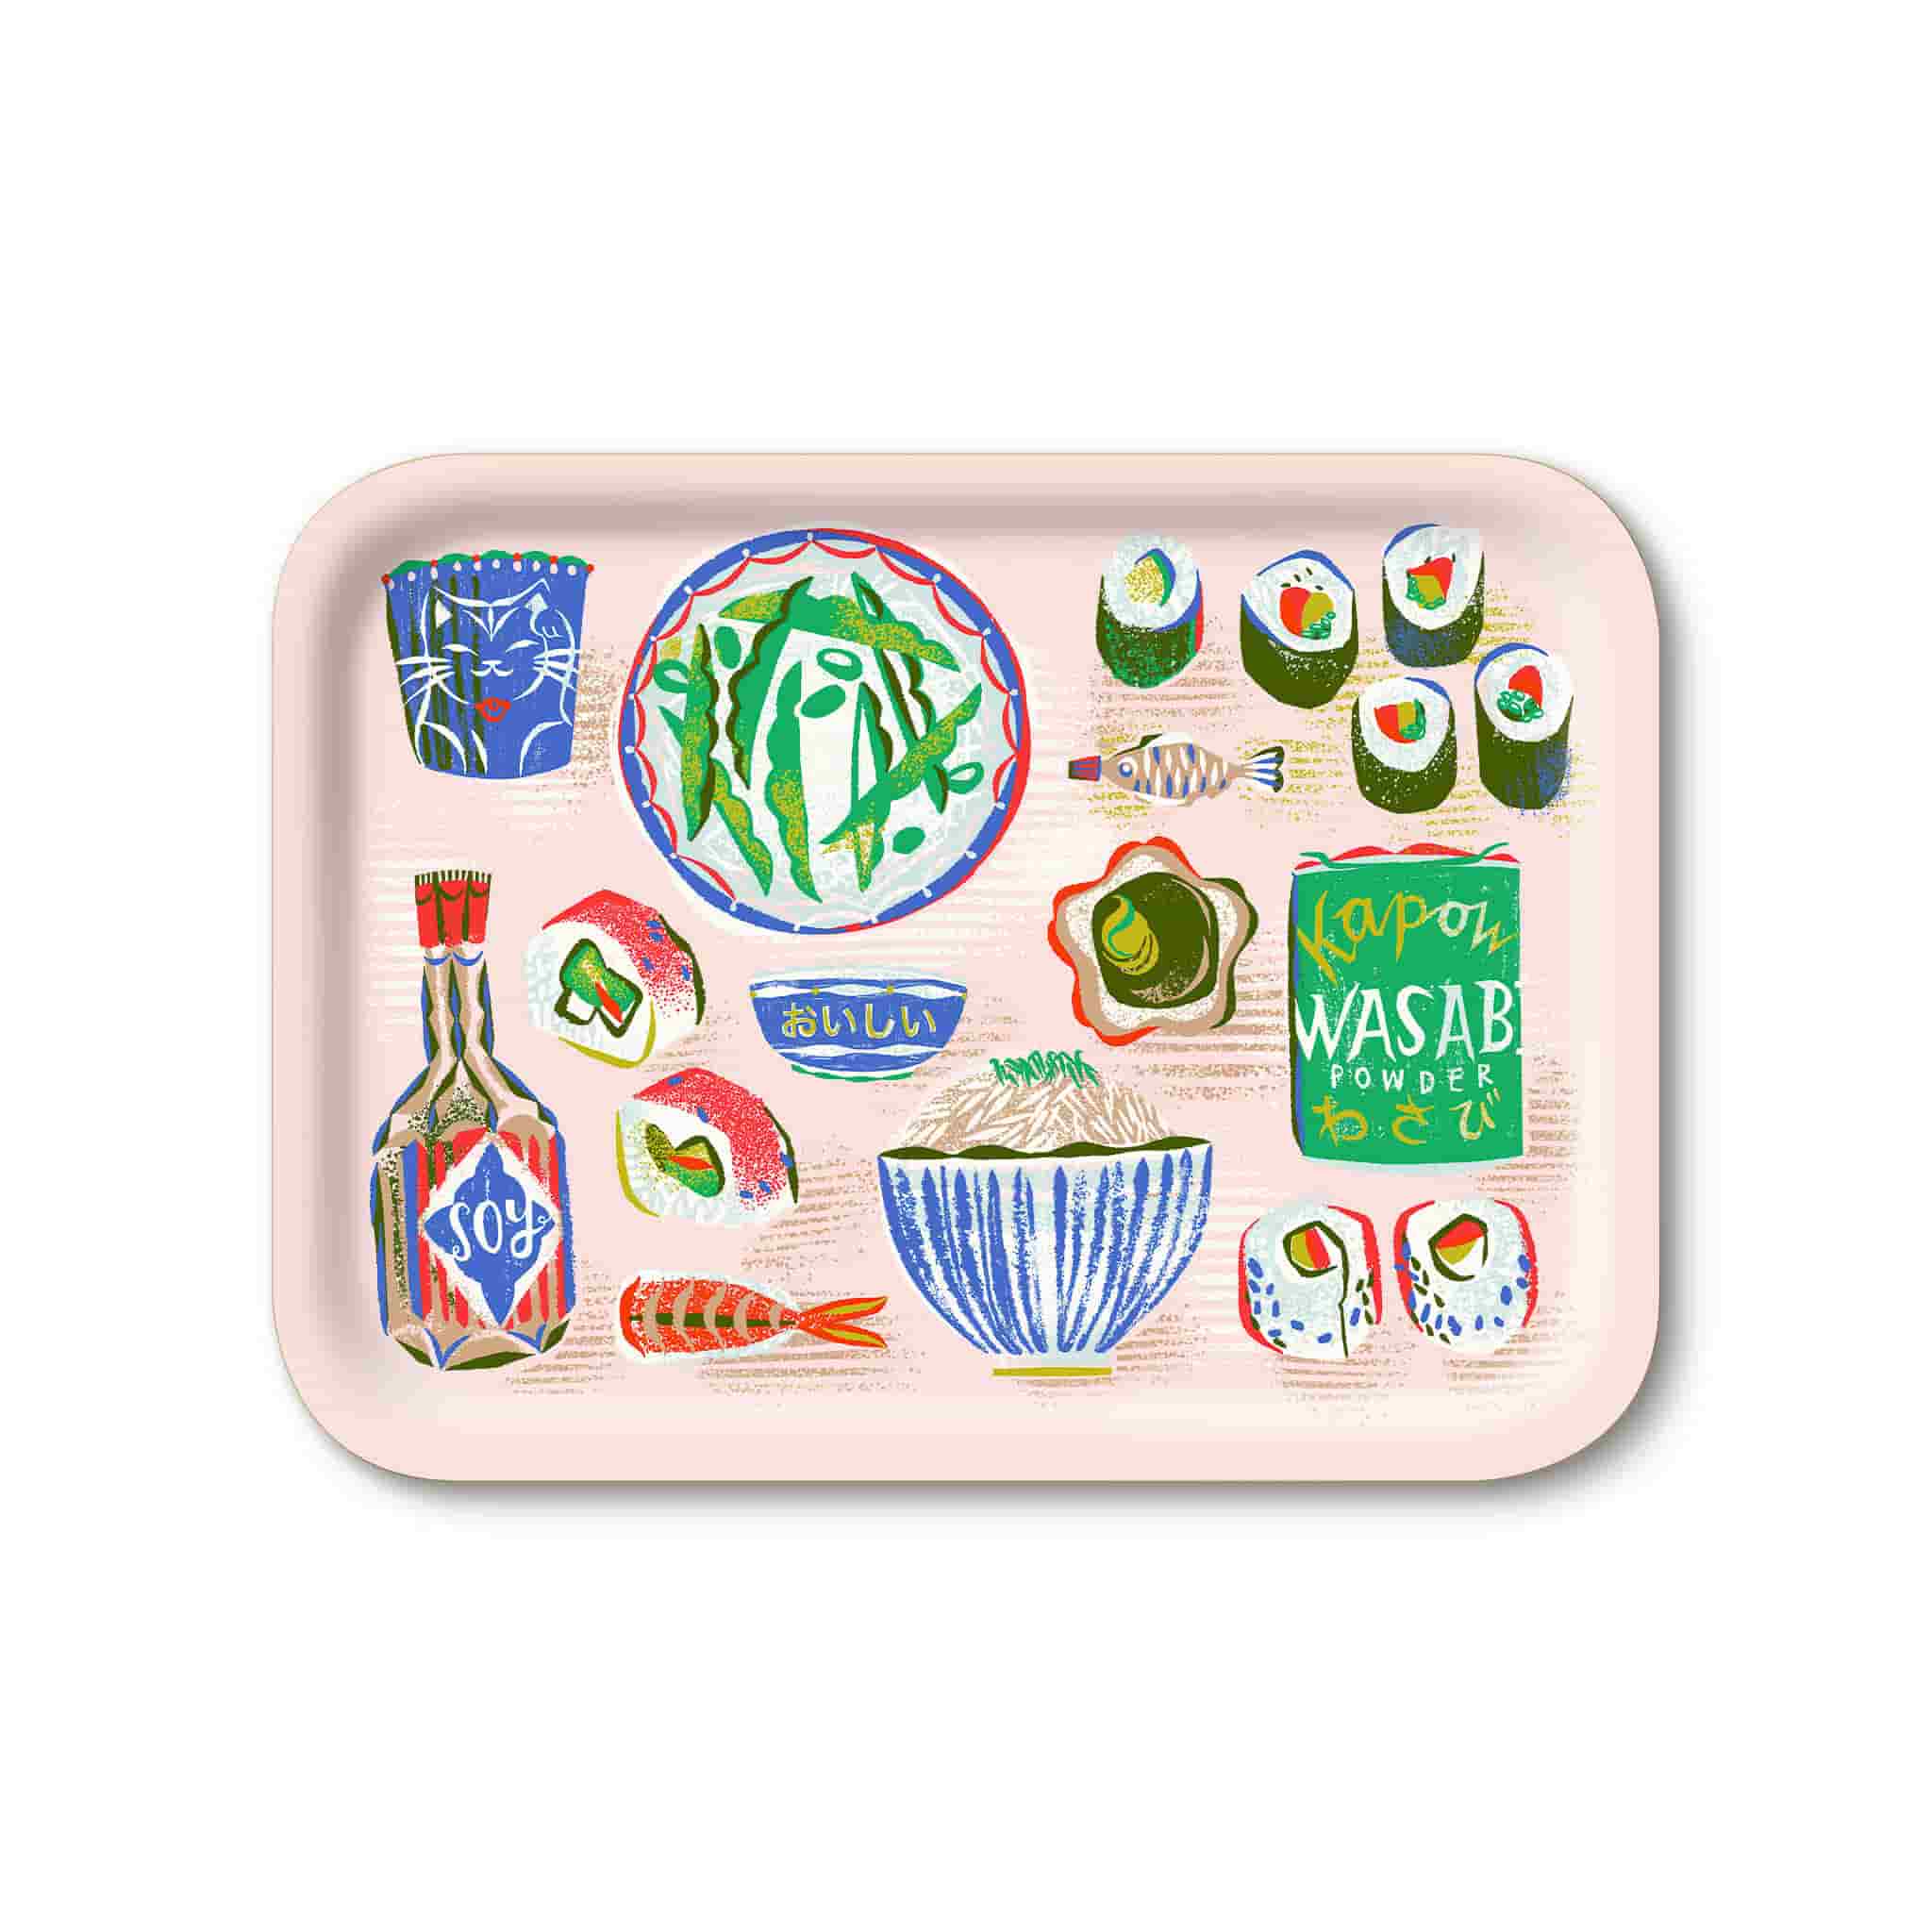 Sushi Design Rectangle Serving Tray, 27x20cm